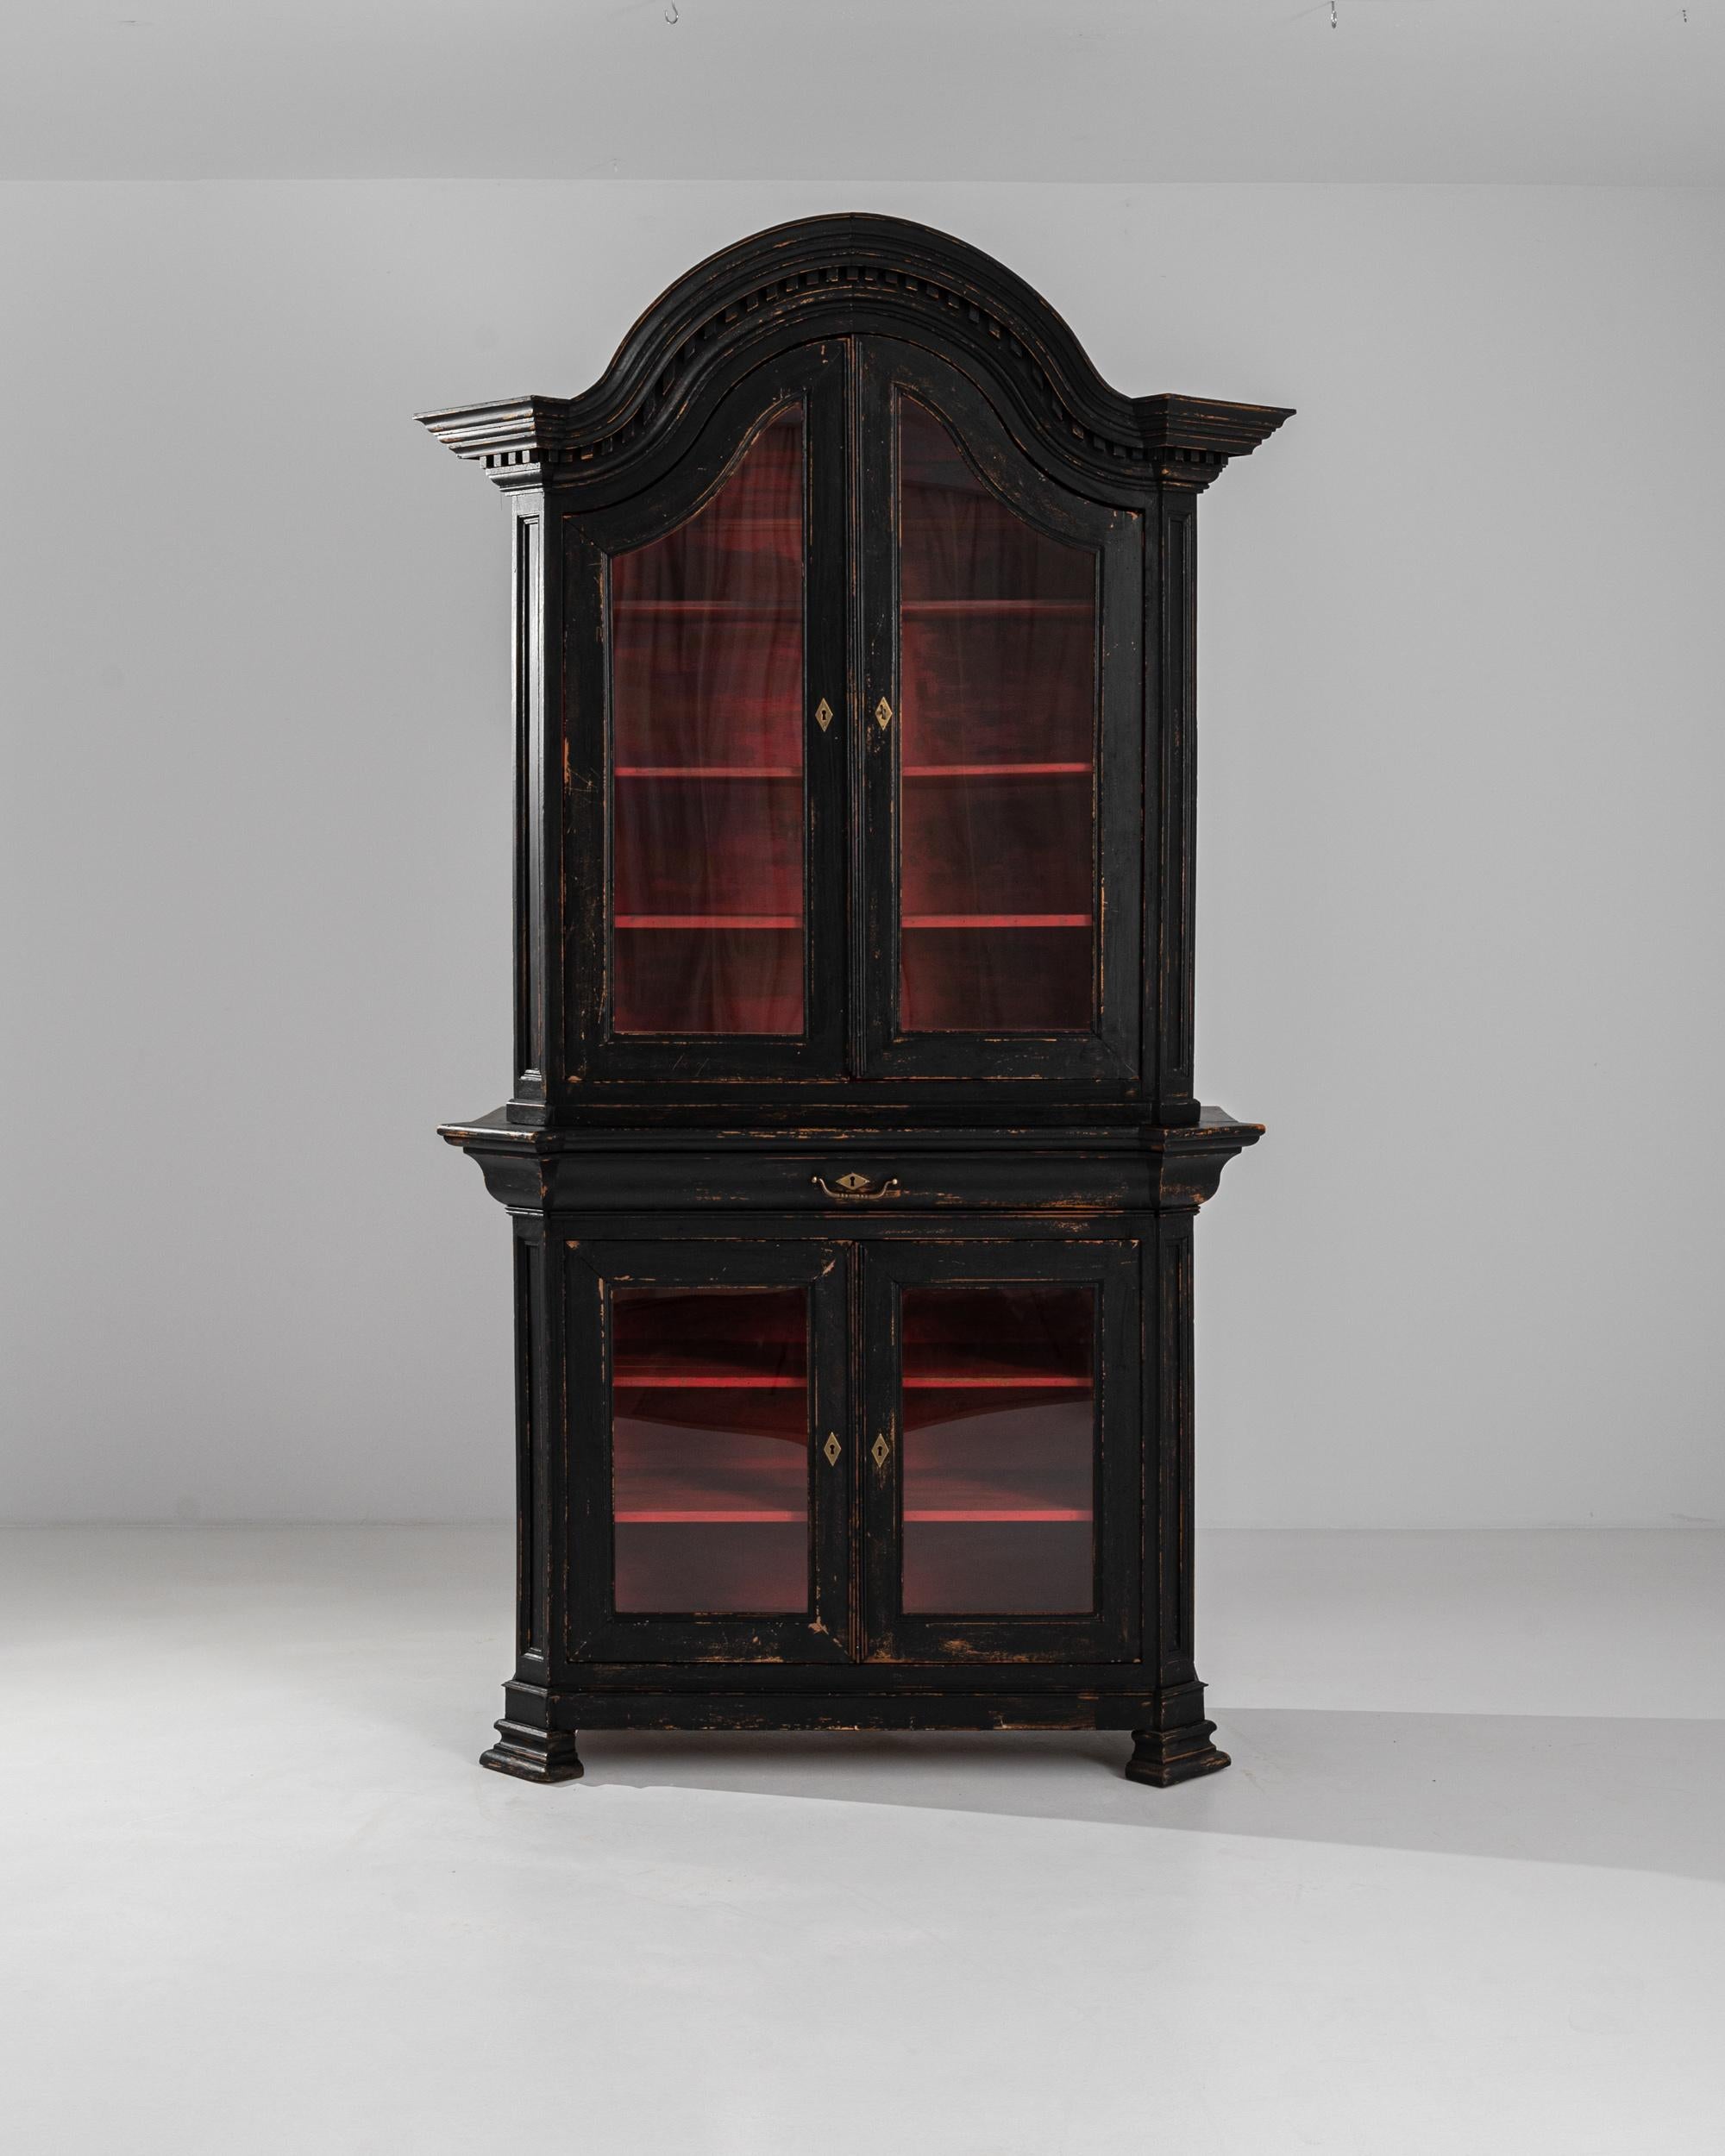 A painted wooden vitrine from 19th century France. Black and moody on the outside, and glowing vibrant red on the interior, this glass display case presents a complex and intriguing persona. Neoclassical moldings and a dramatic arched shape announce